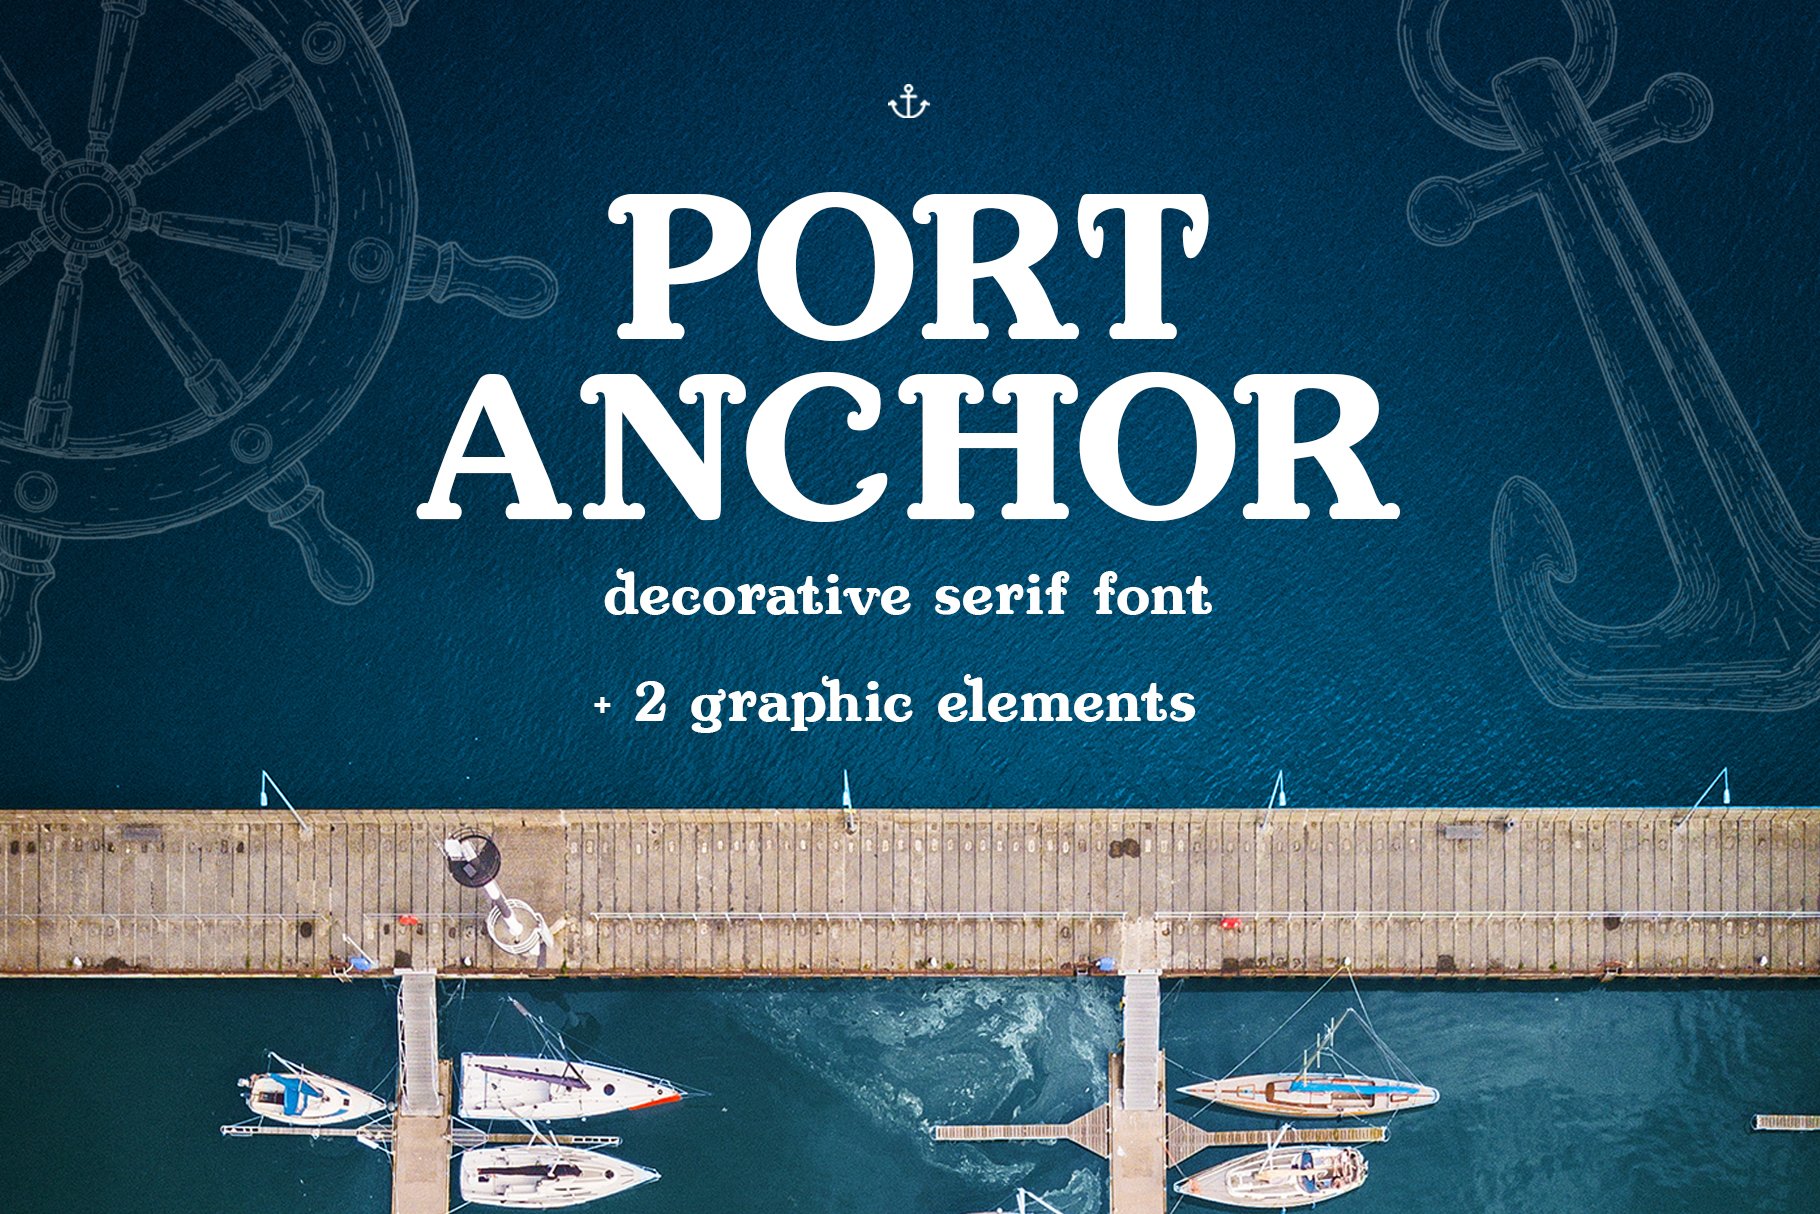 Port Anchor cover image.